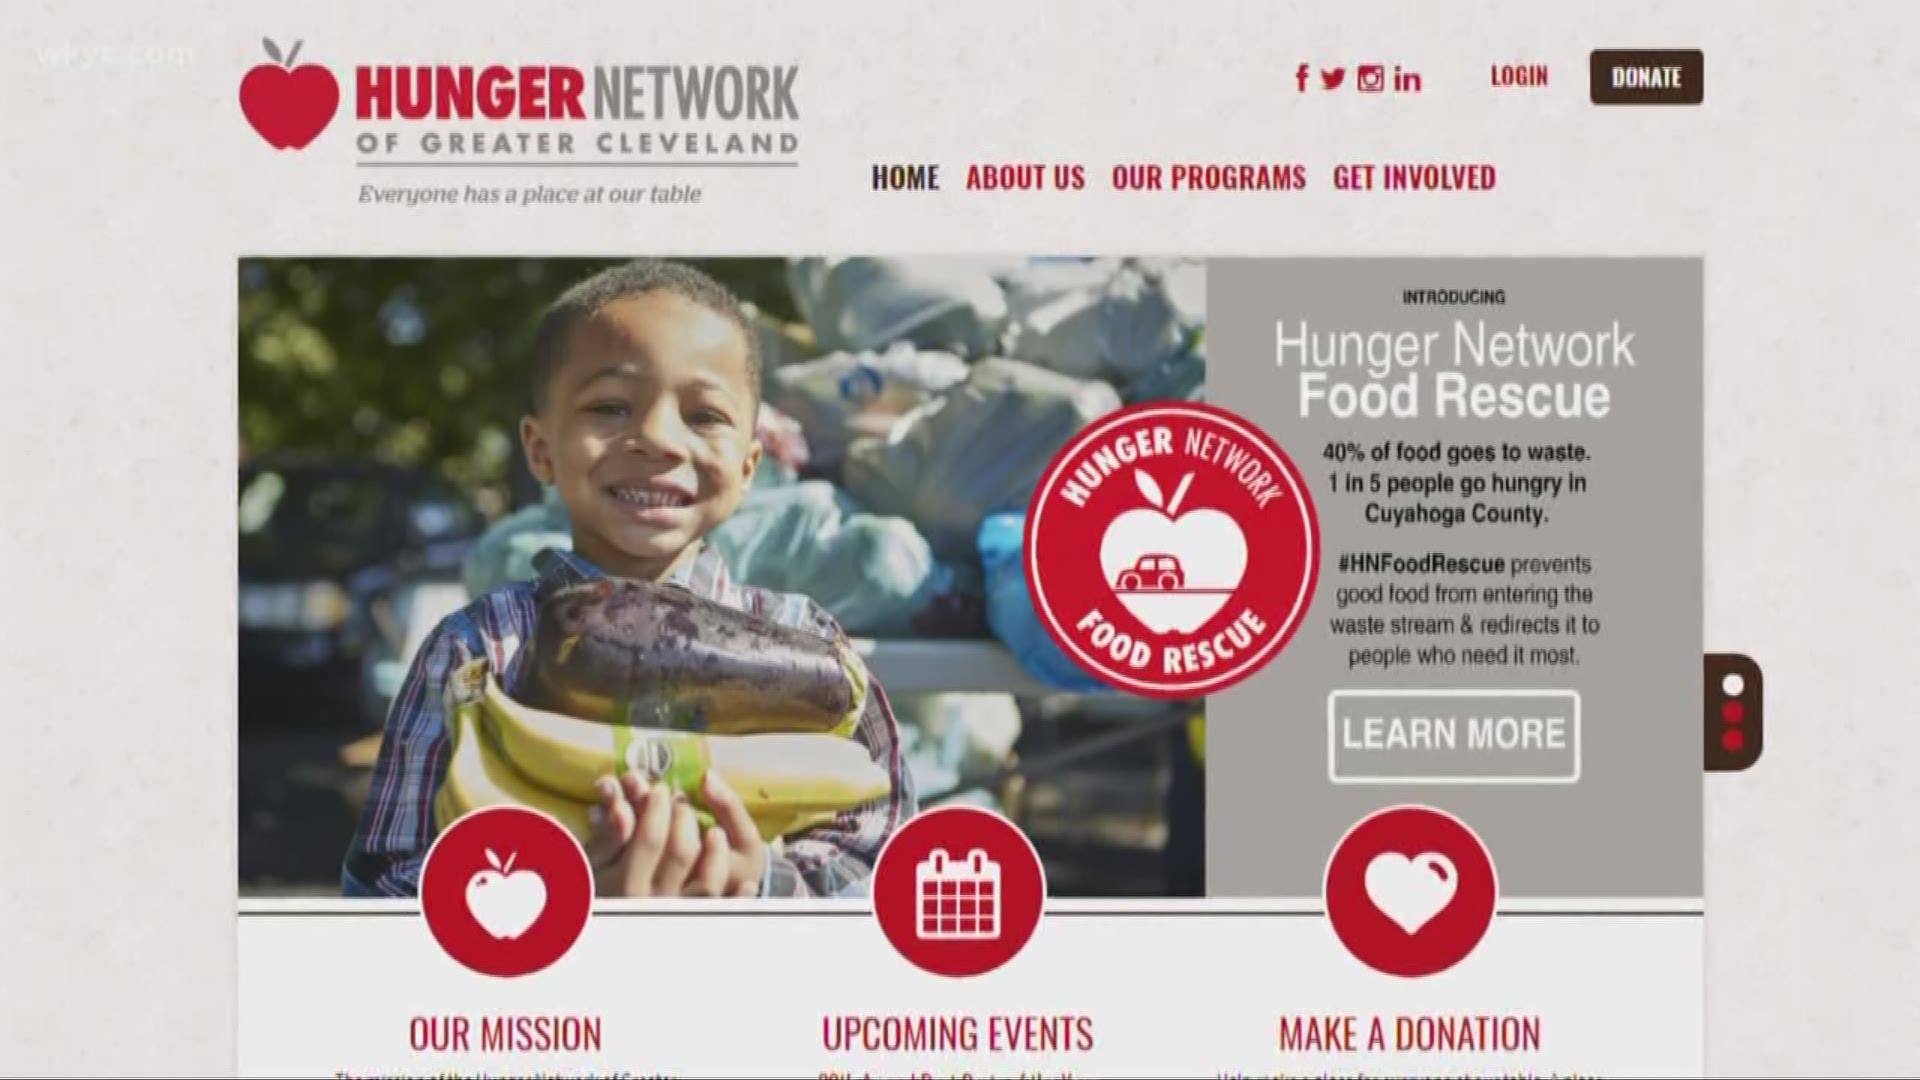 Hunger network aims to help feed those in need